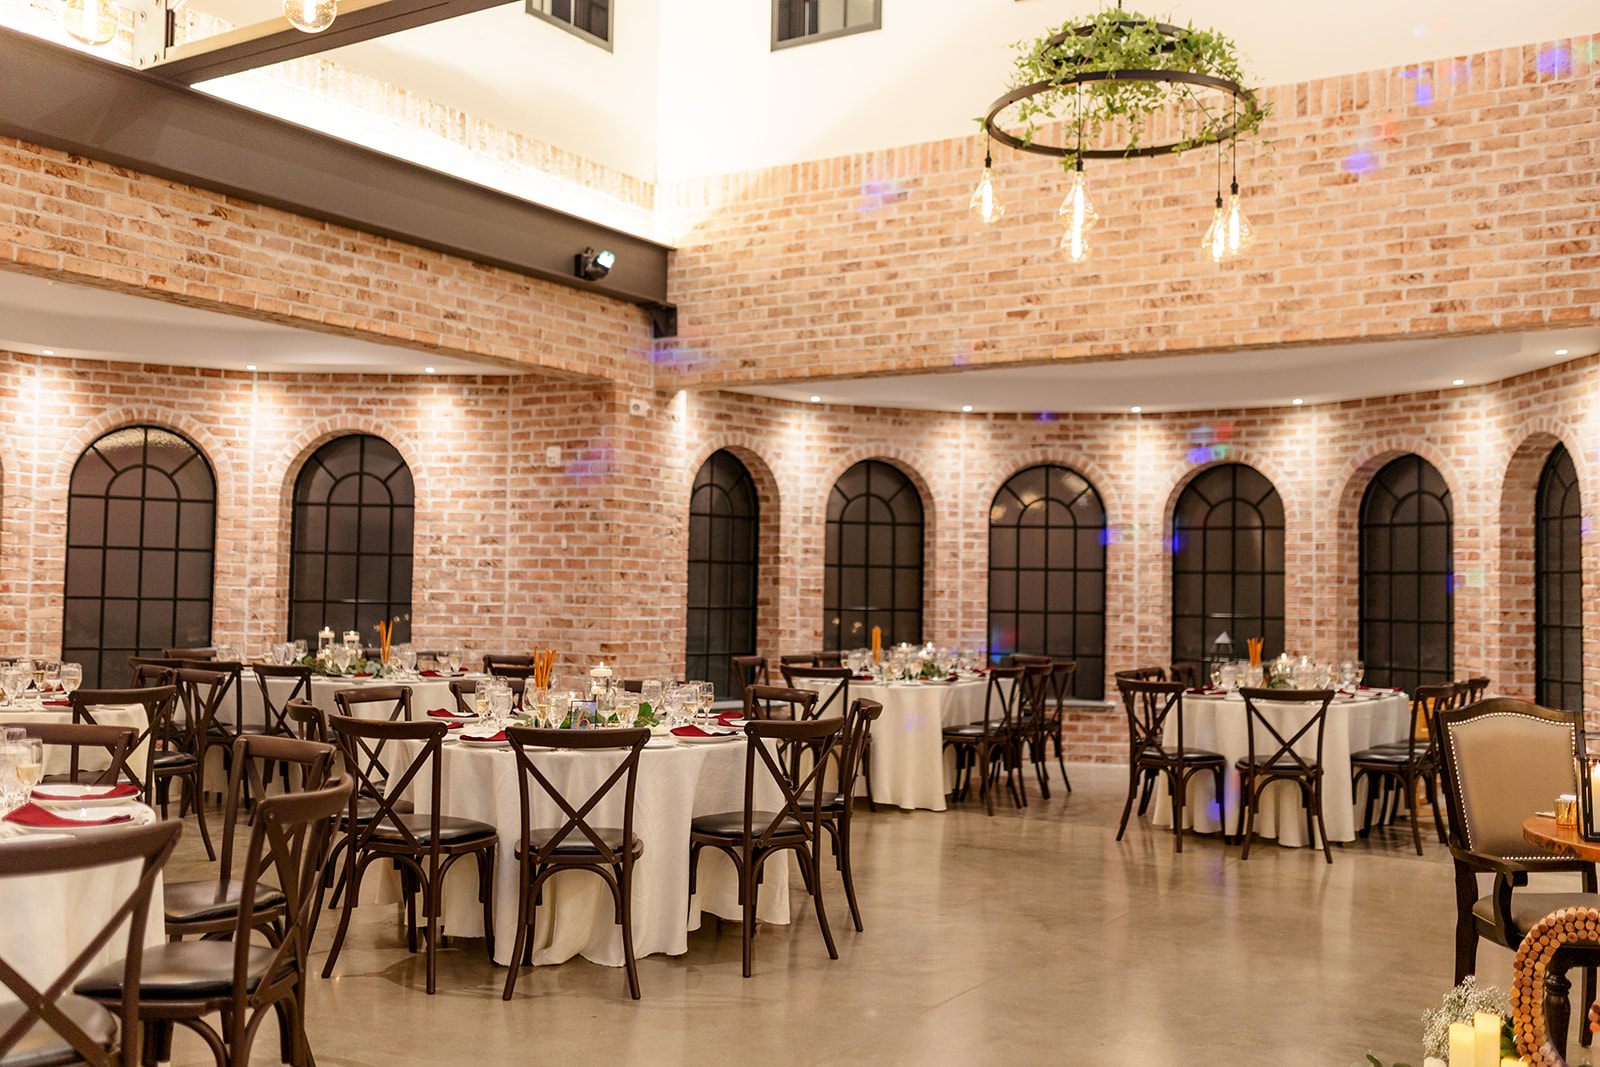 Details of a wedding reception set up in a brick building with white linens and dark chairs